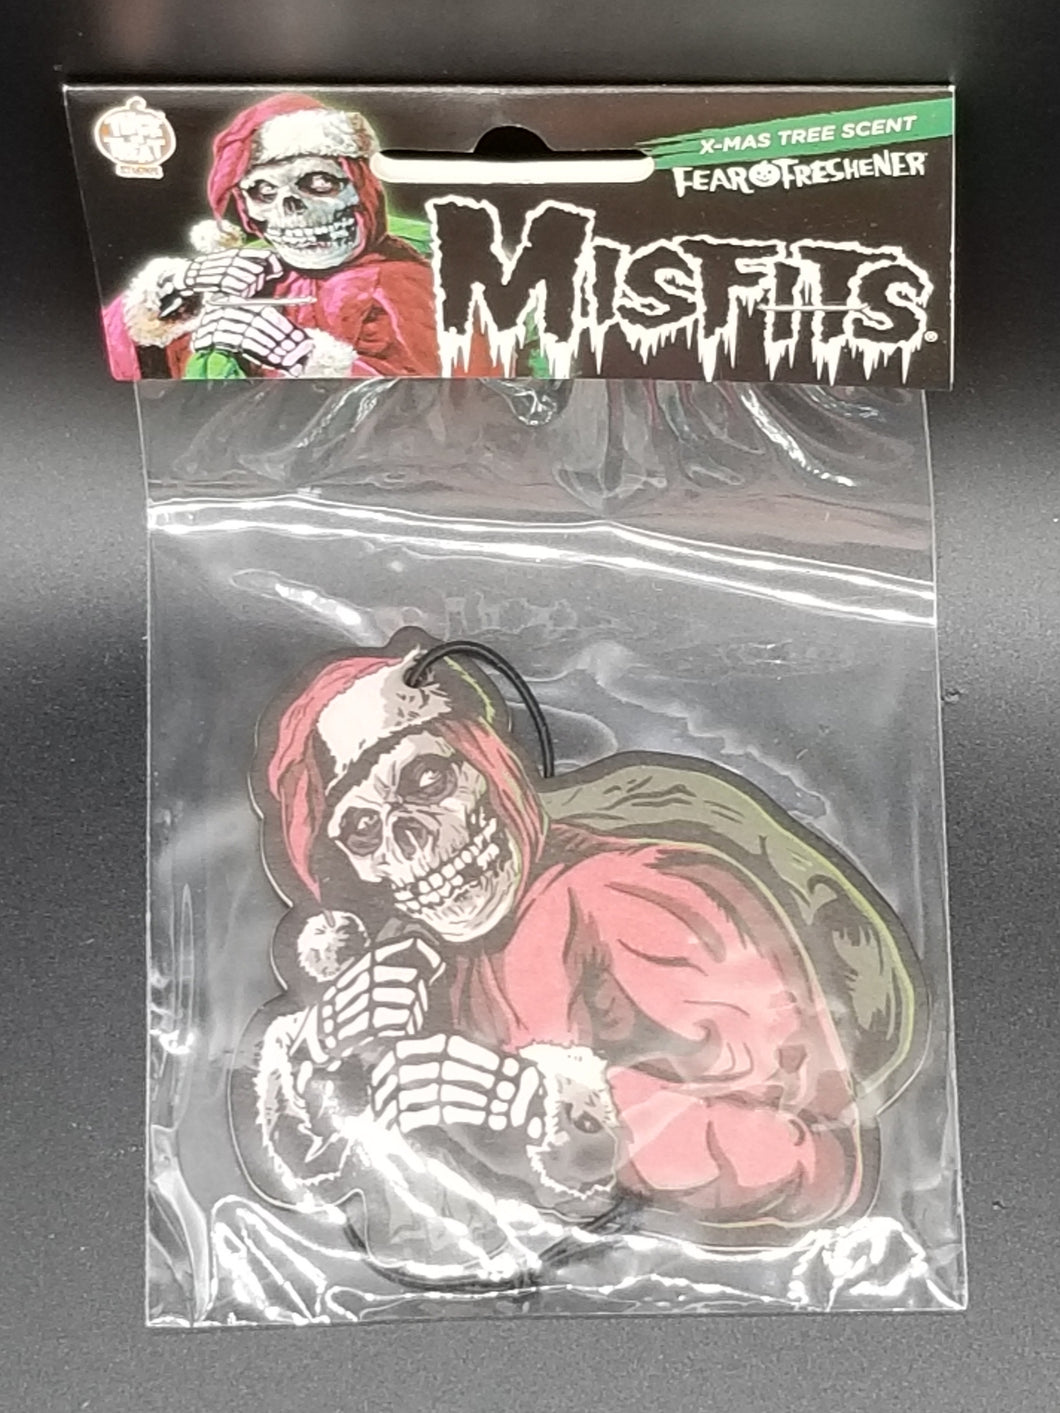 The Misfits Christmas Holiday Fiend Fear Freshner